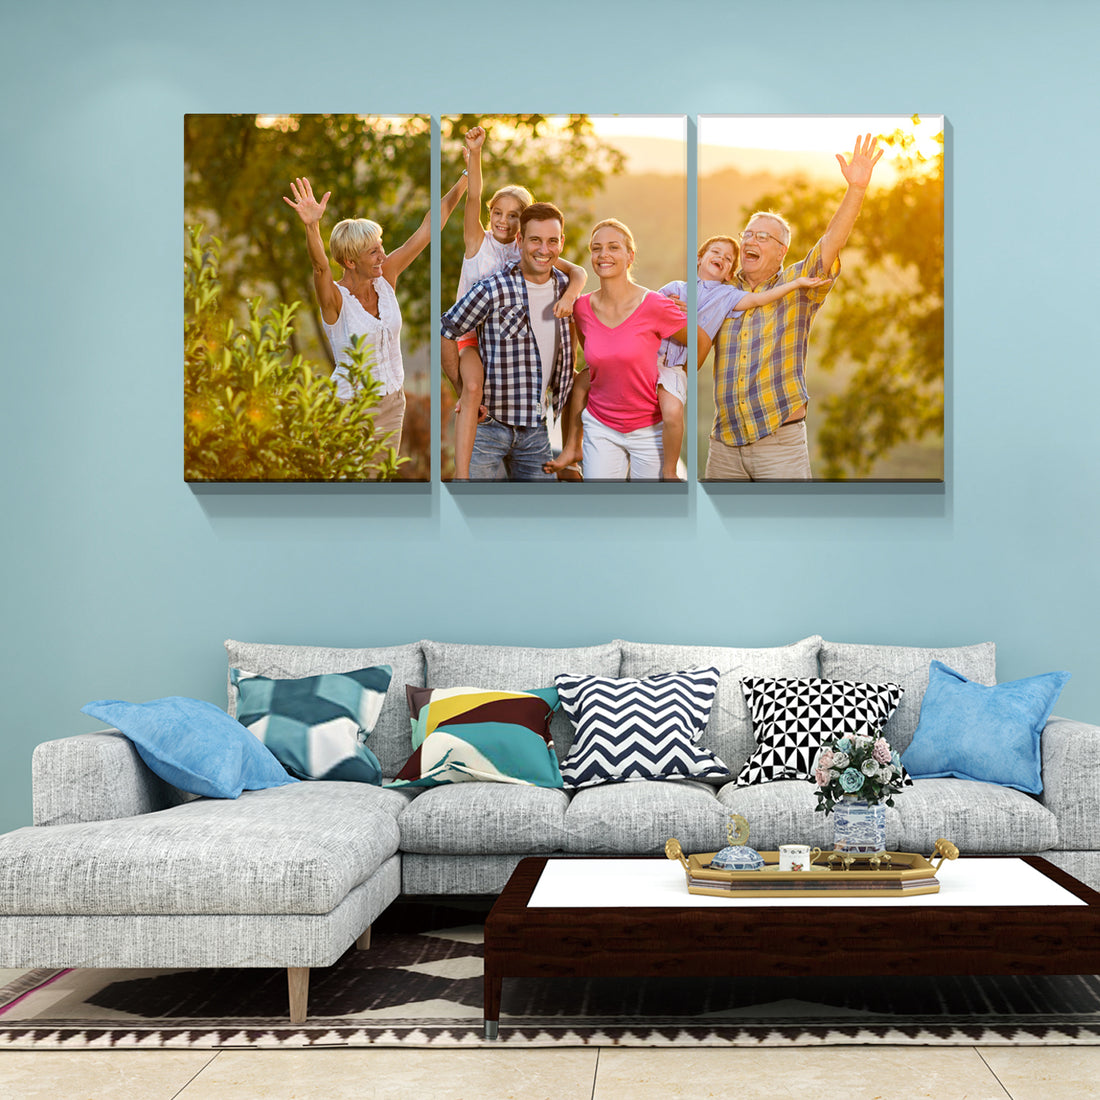 3 Panels Customize Canvas Prints with Your Photo